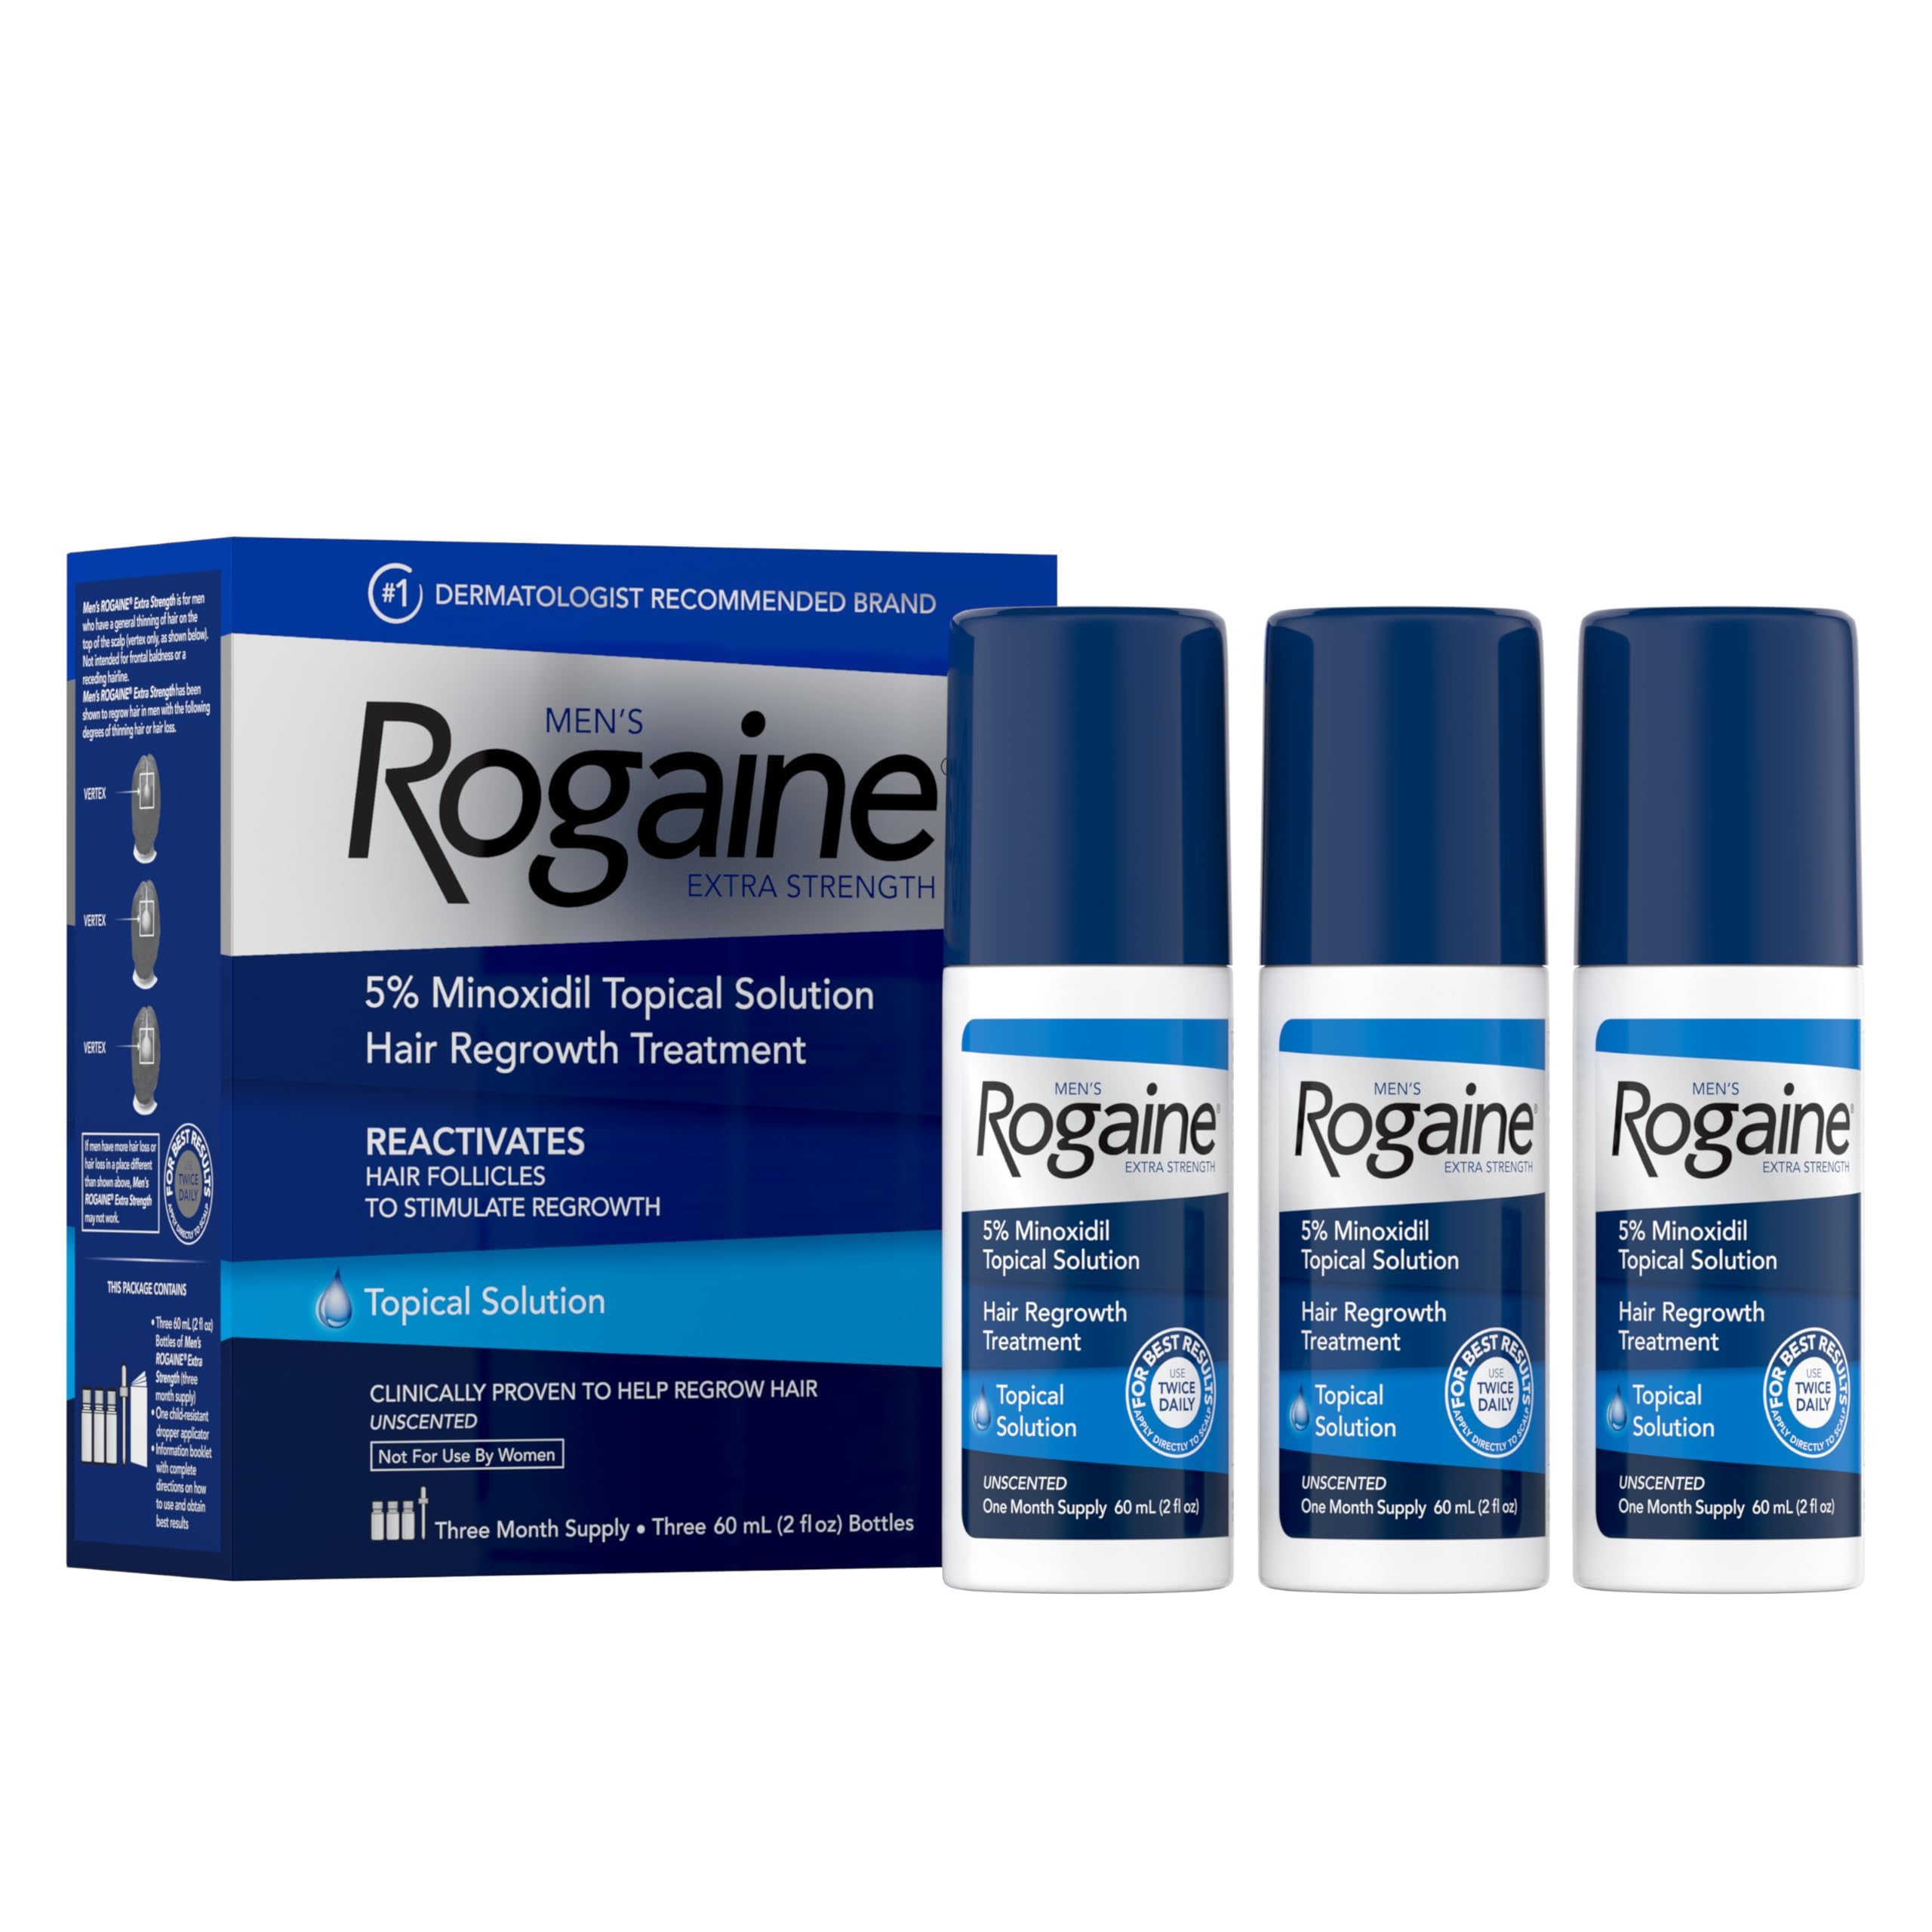 Men's Rogaine Extra Strength 5% Minoxidil Topical Solution for Thin Hair, Hair Loss Treatment to Regrow Fuller, Thicker Hair, 3-Month Supply, 3 x 2 fl. oz